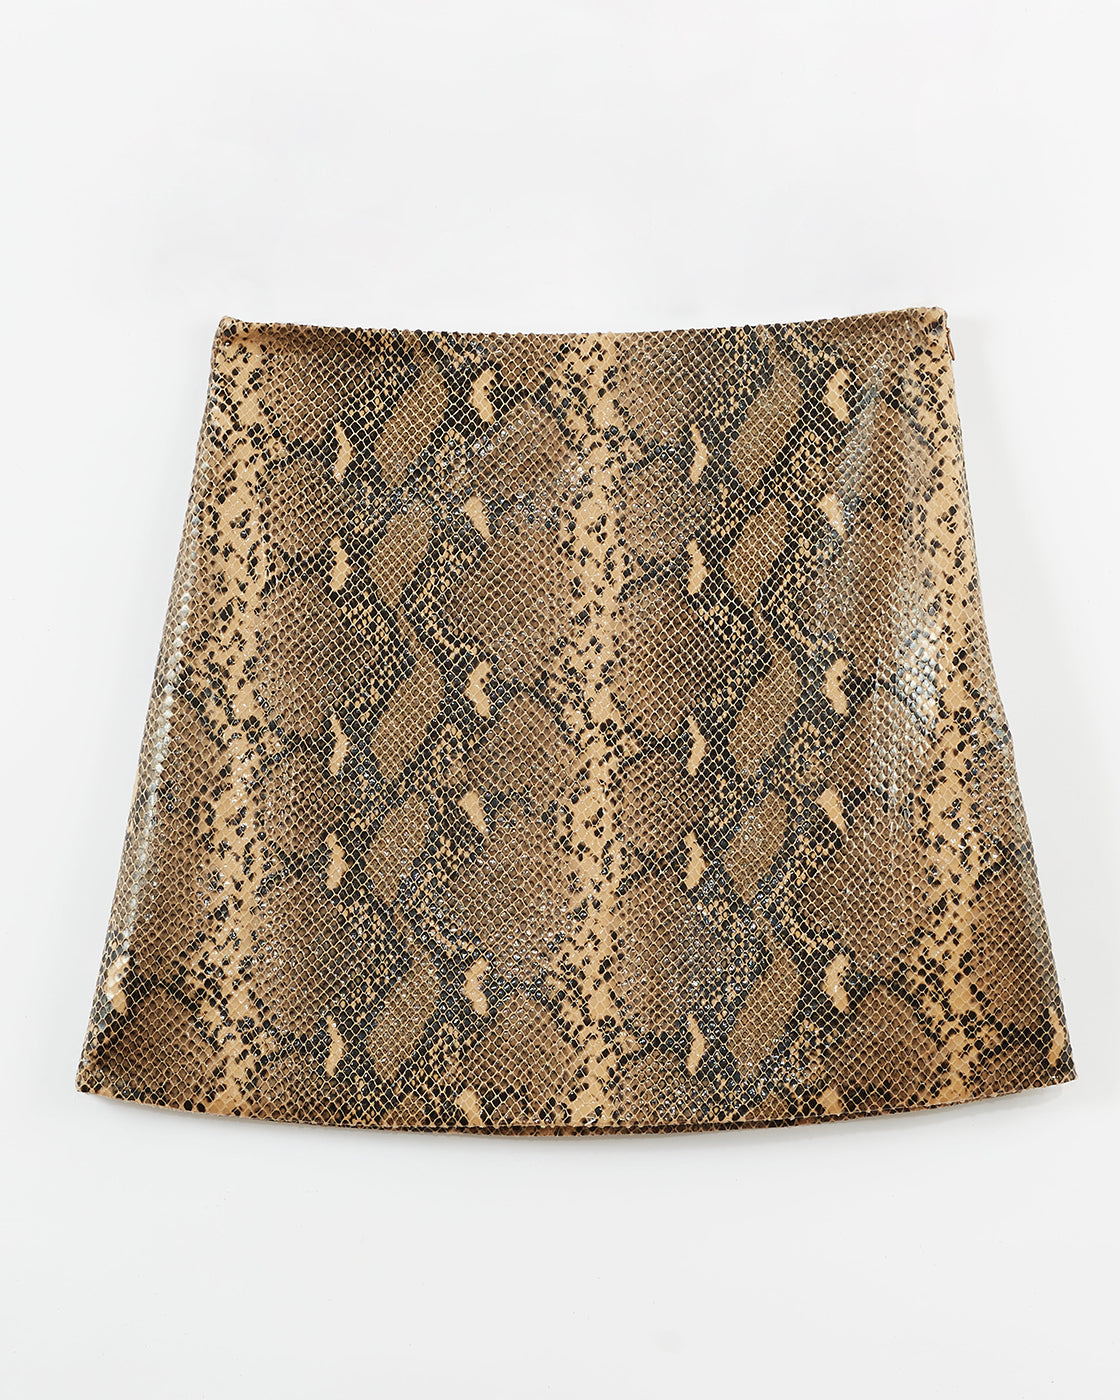 Elodie Skirt Faux Leather Snake Effect Beige